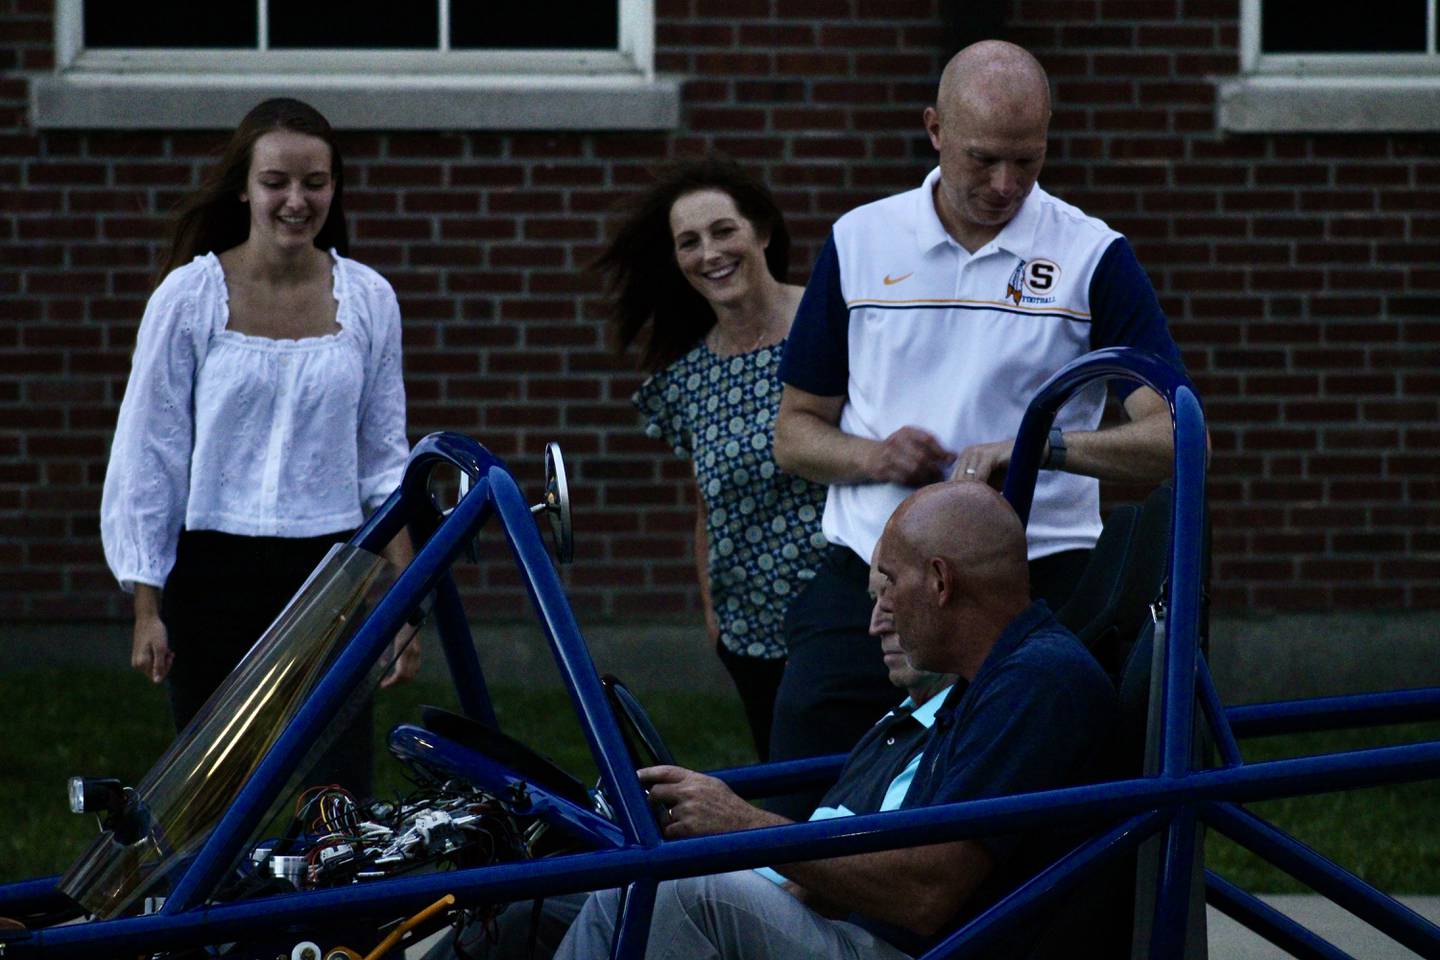 Sterling Public Schools Superintendent Tad Everett settles in behind the wheel of a Switch electric vehicle on Wednesday evening at the high school. Director of Finance Timothy Schwingle is the passenger. The car was assembled by physics students as part of an instructional kit. From left, is one of the students who worked on the project, Paige Geil, board member Julie Zuidema, and Principal Jason Austin. During the demonstration, members of the board and school administration took turns driving it across the nearby parking lot.